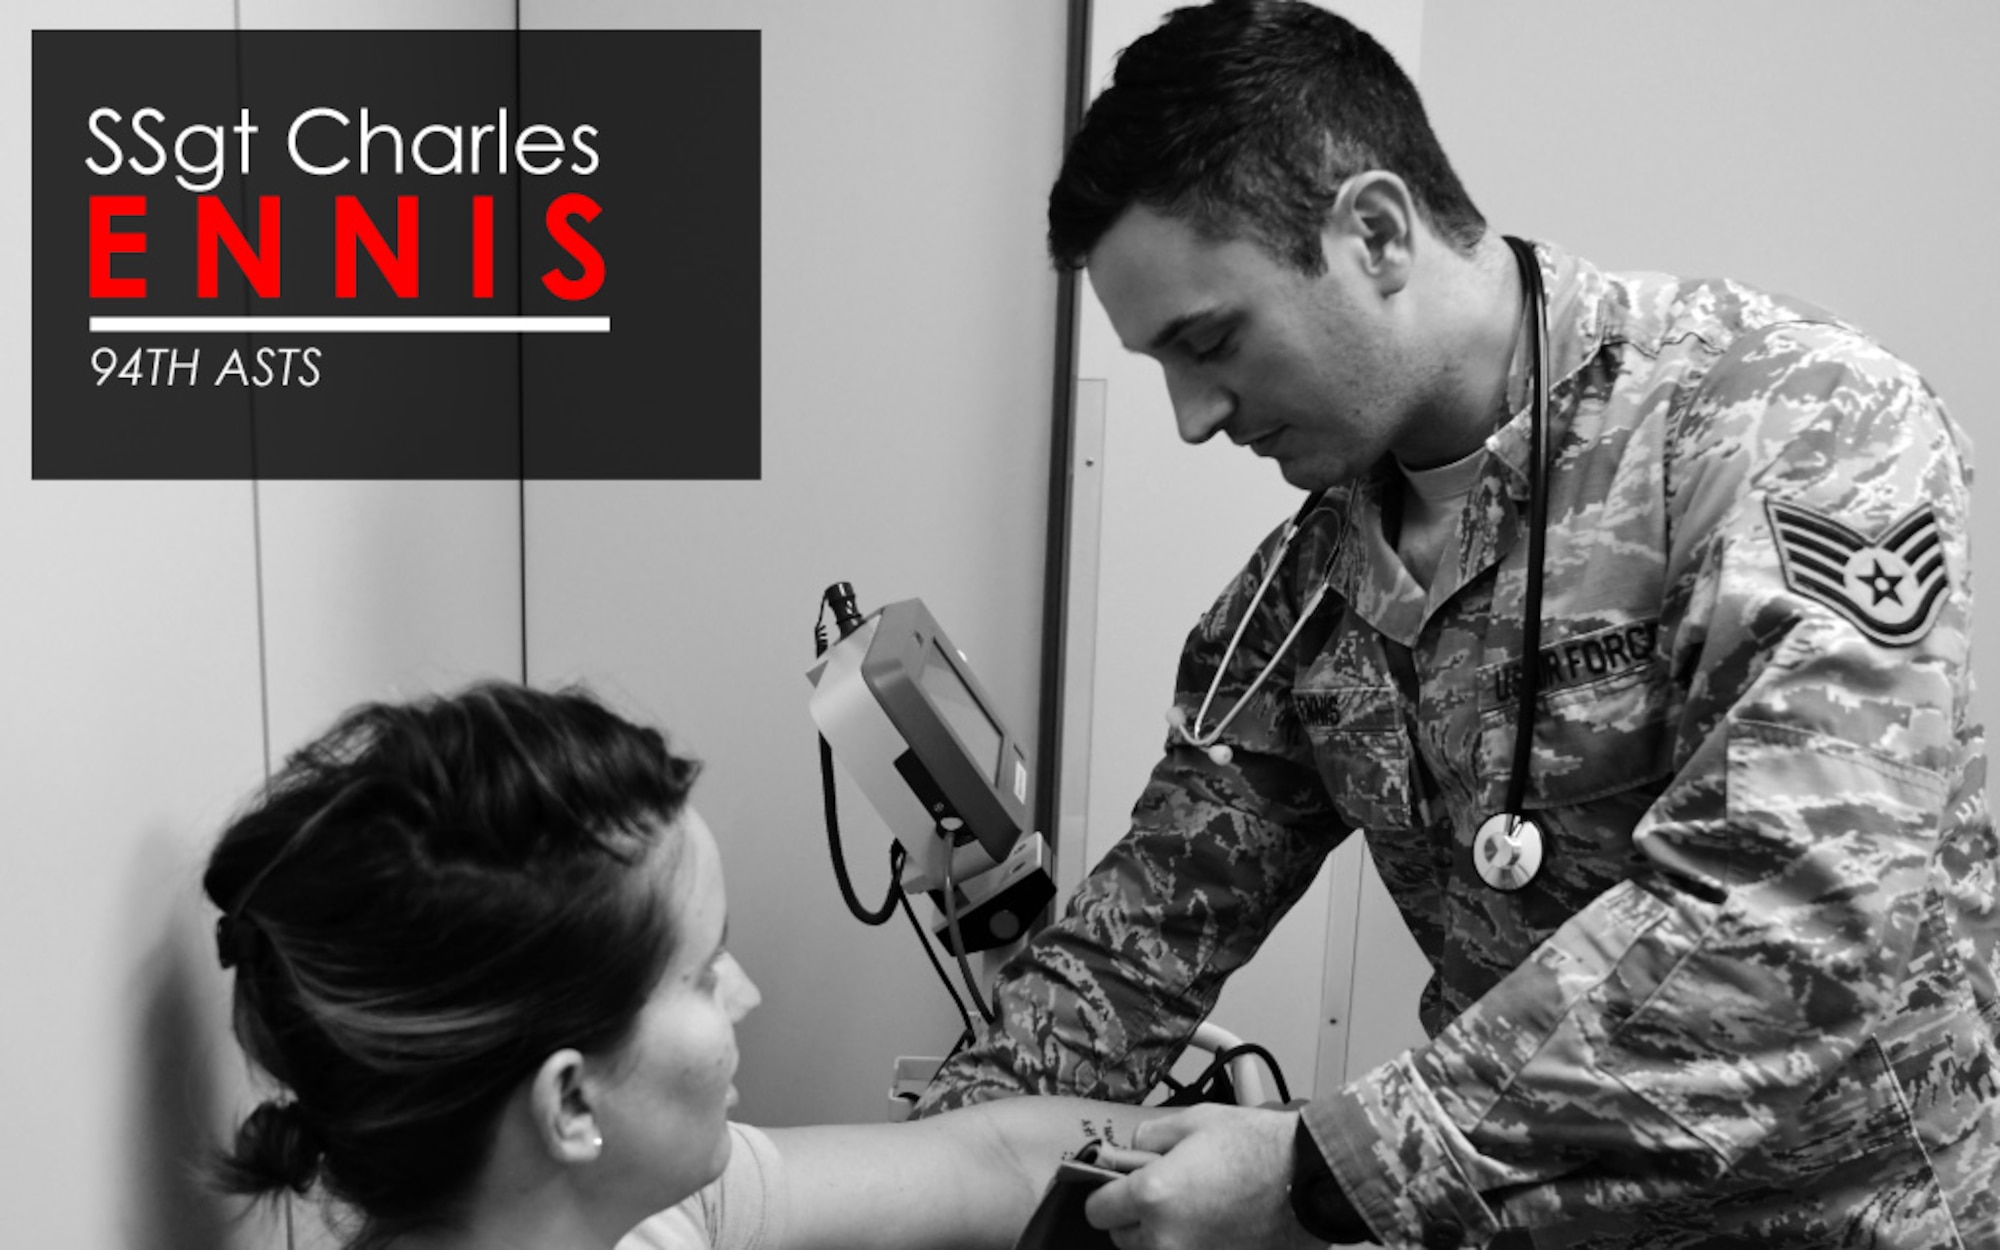 This week’s Up Close features Staff Sgt. Charles Ennis, 94th Aeromedical Staging Squadron medical technician.